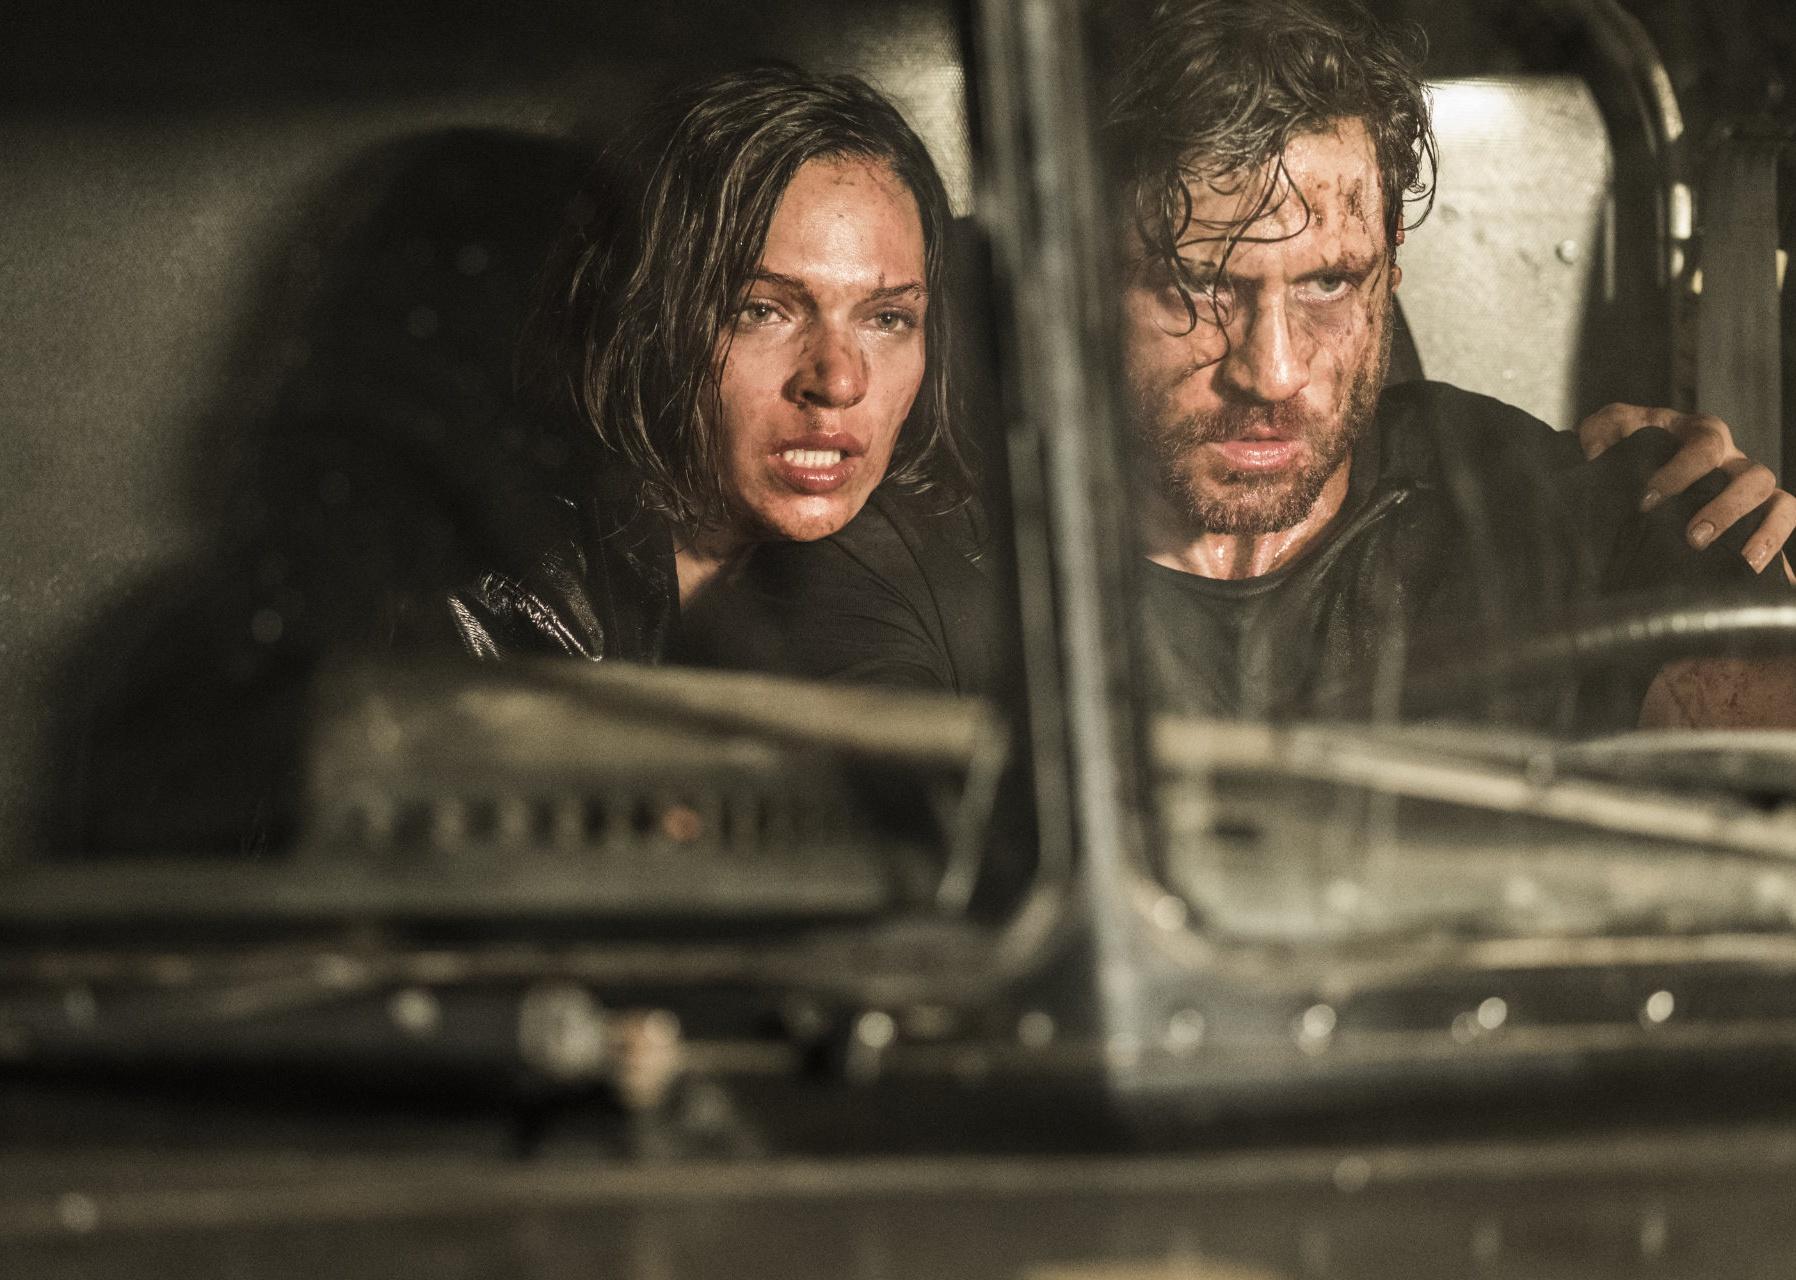 A man and woman looking tired, dirty and scared driving a truck.